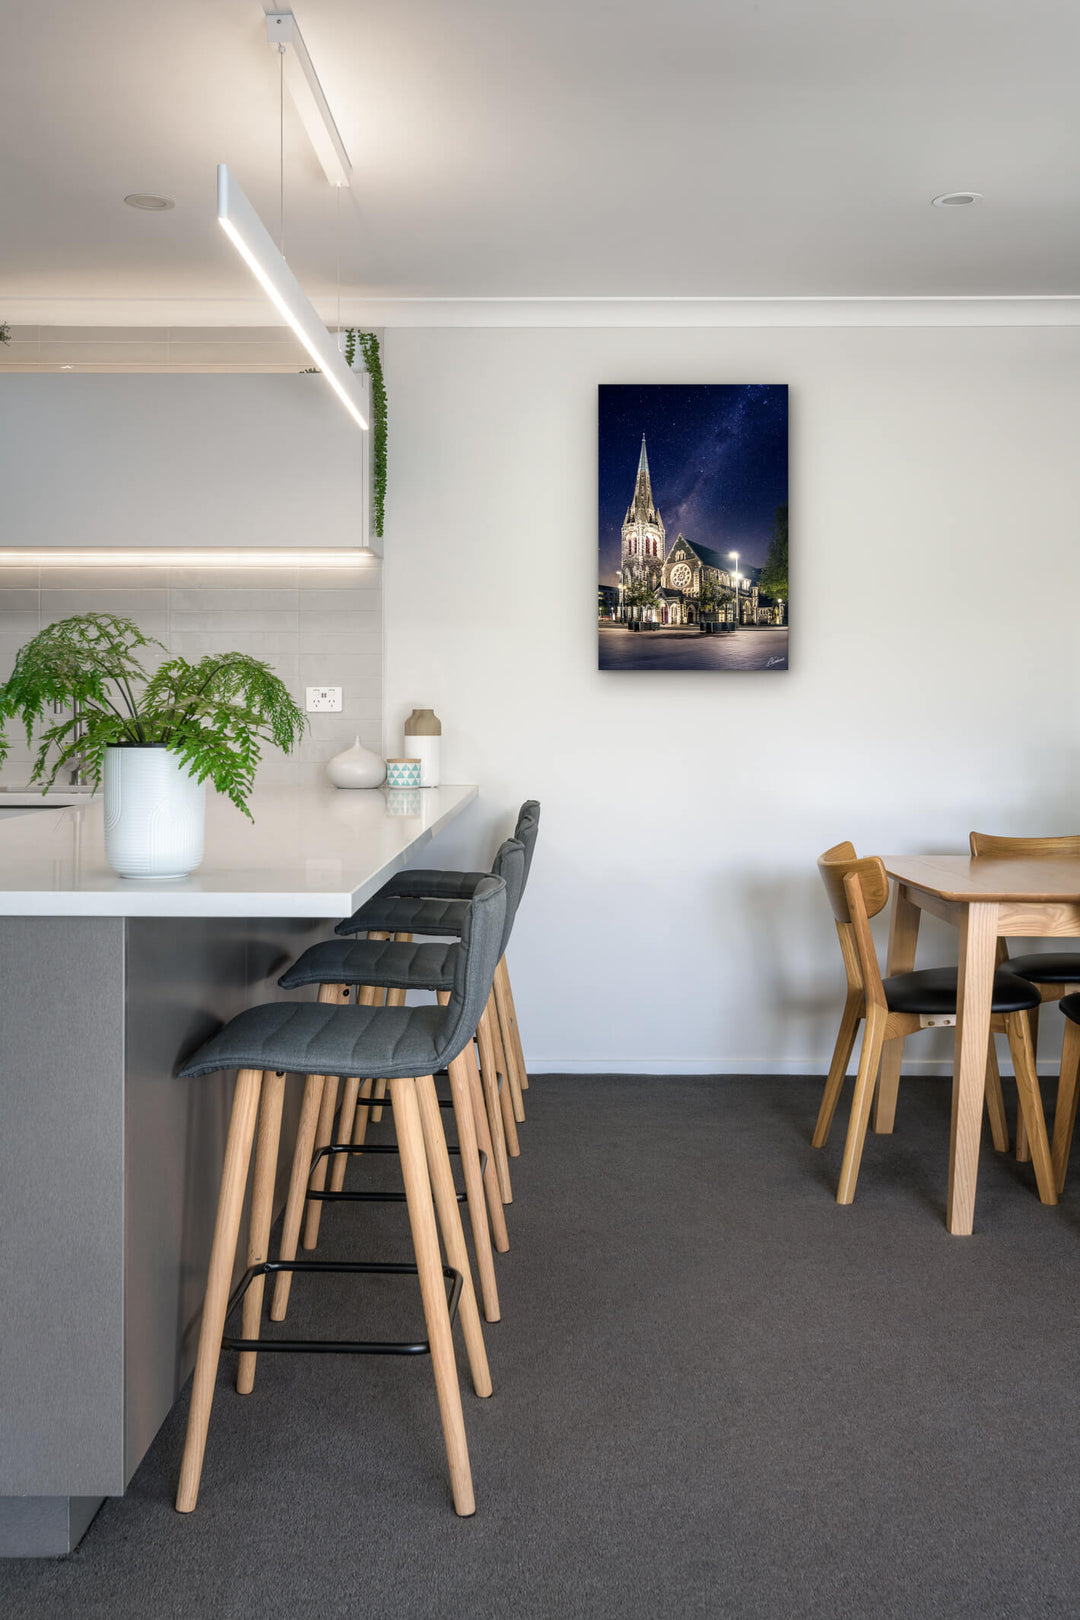 Christchurch Cathedral image on kitchen wall as interior art